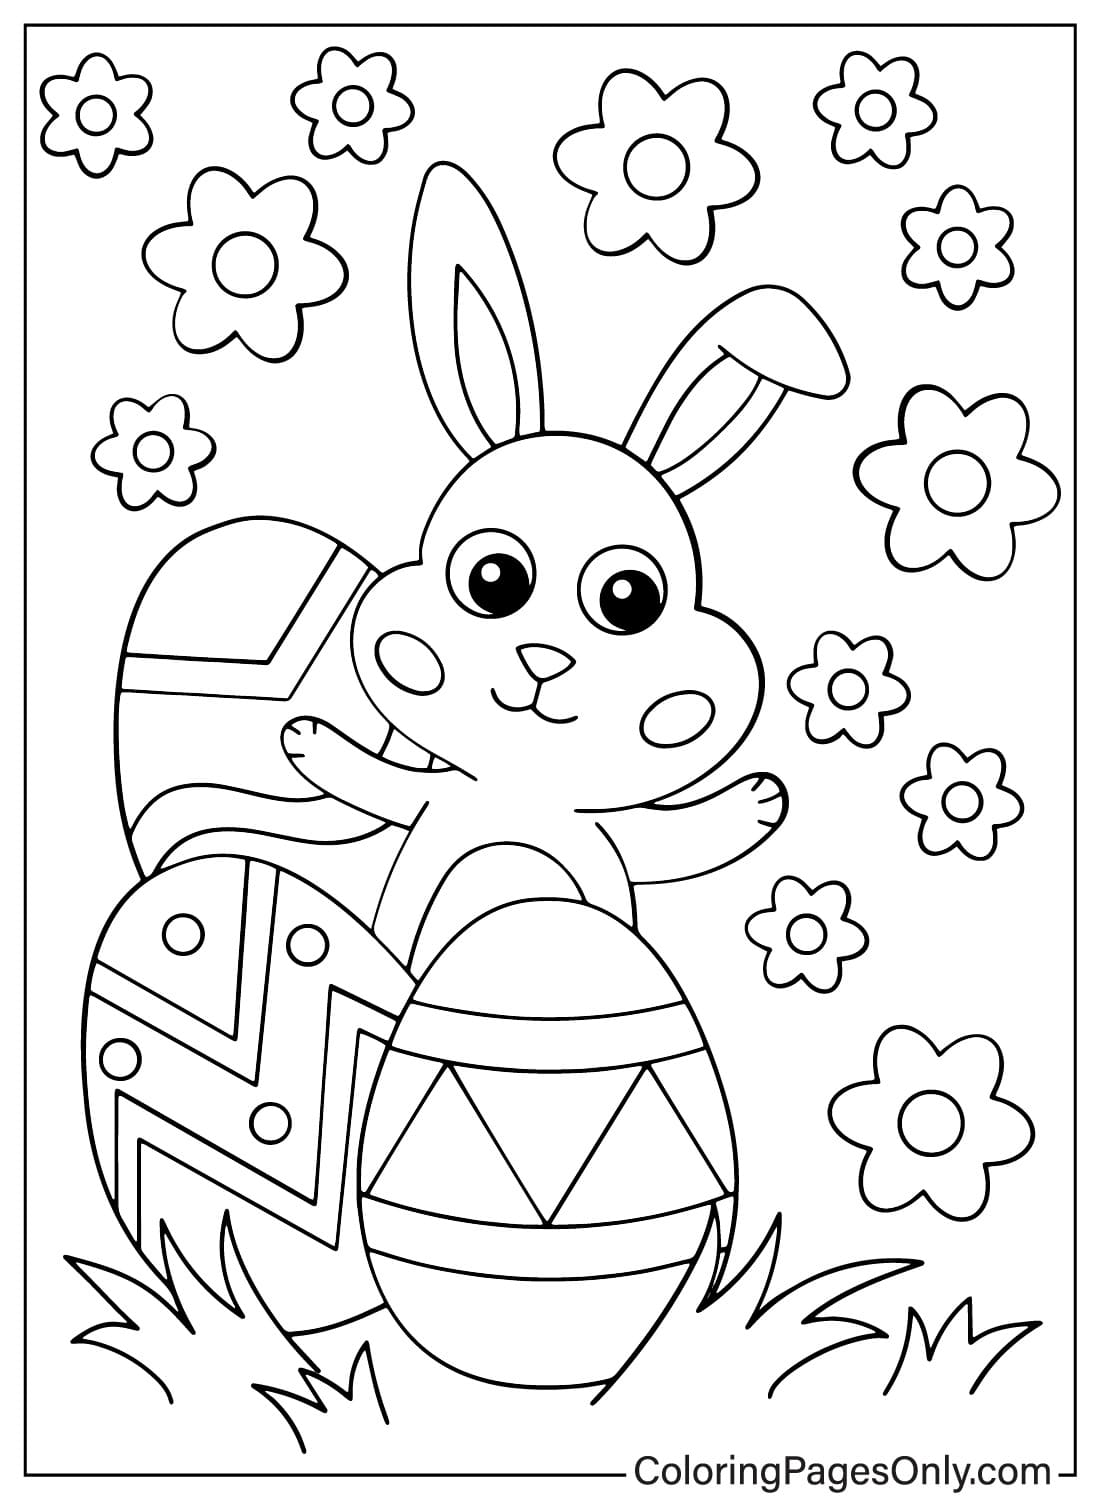 Easter Eggs and Bunny Coloring Page Free